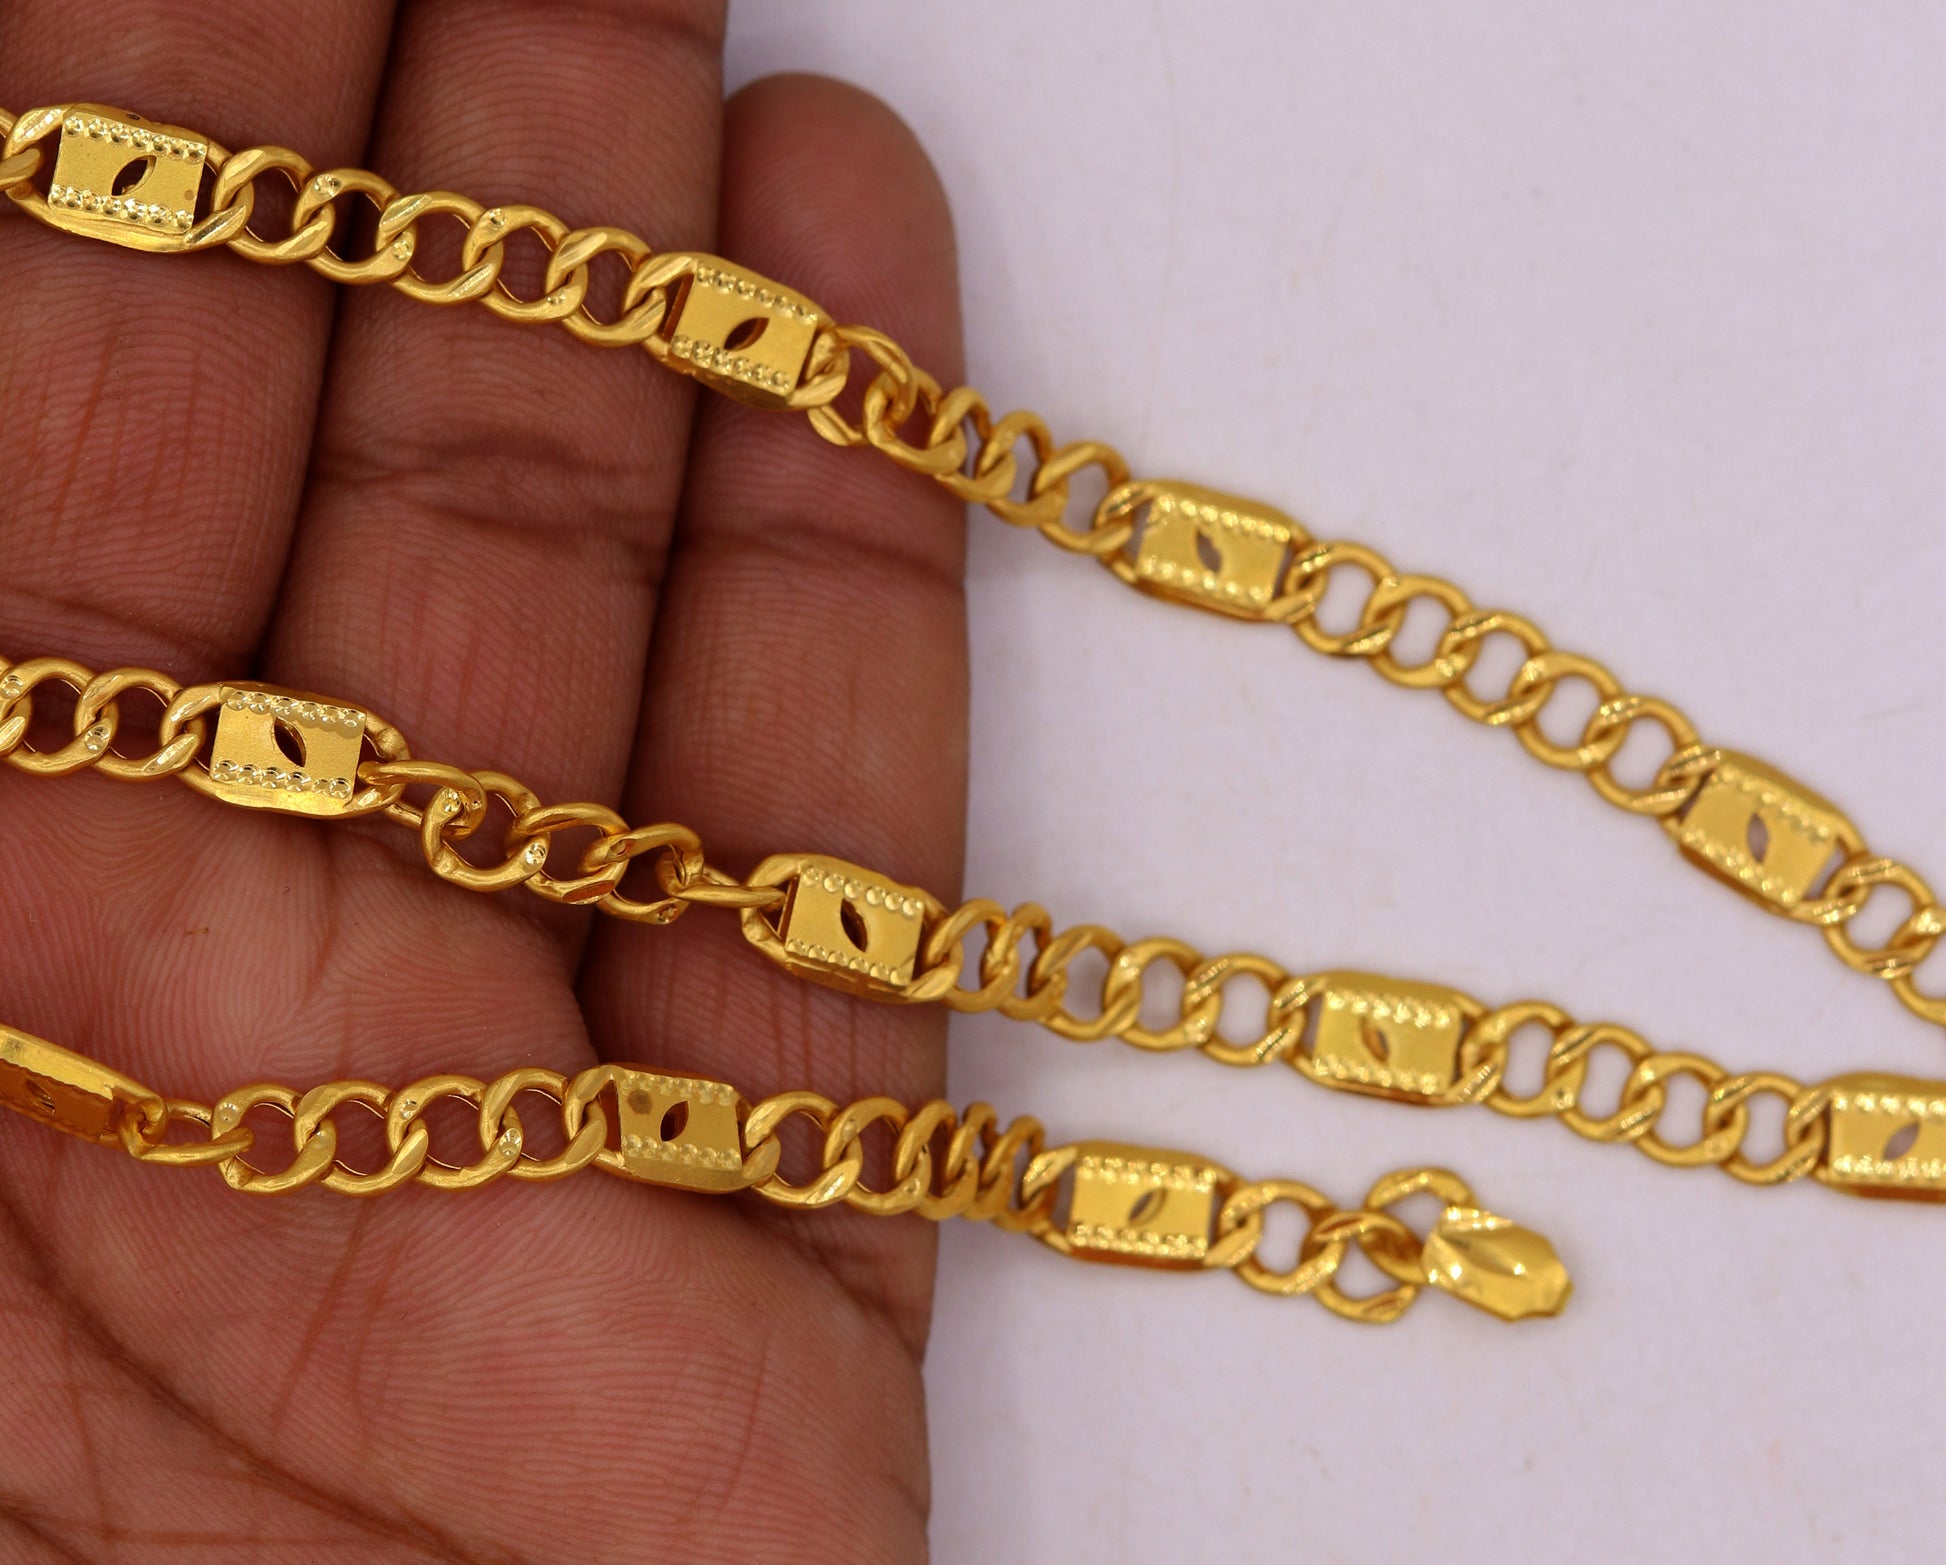 22k yellow gold handmade 18 inches link figaro chain men's women's unisex necklace gorgeous nawabi chain desigh - TRIBAL ORNAMENTS